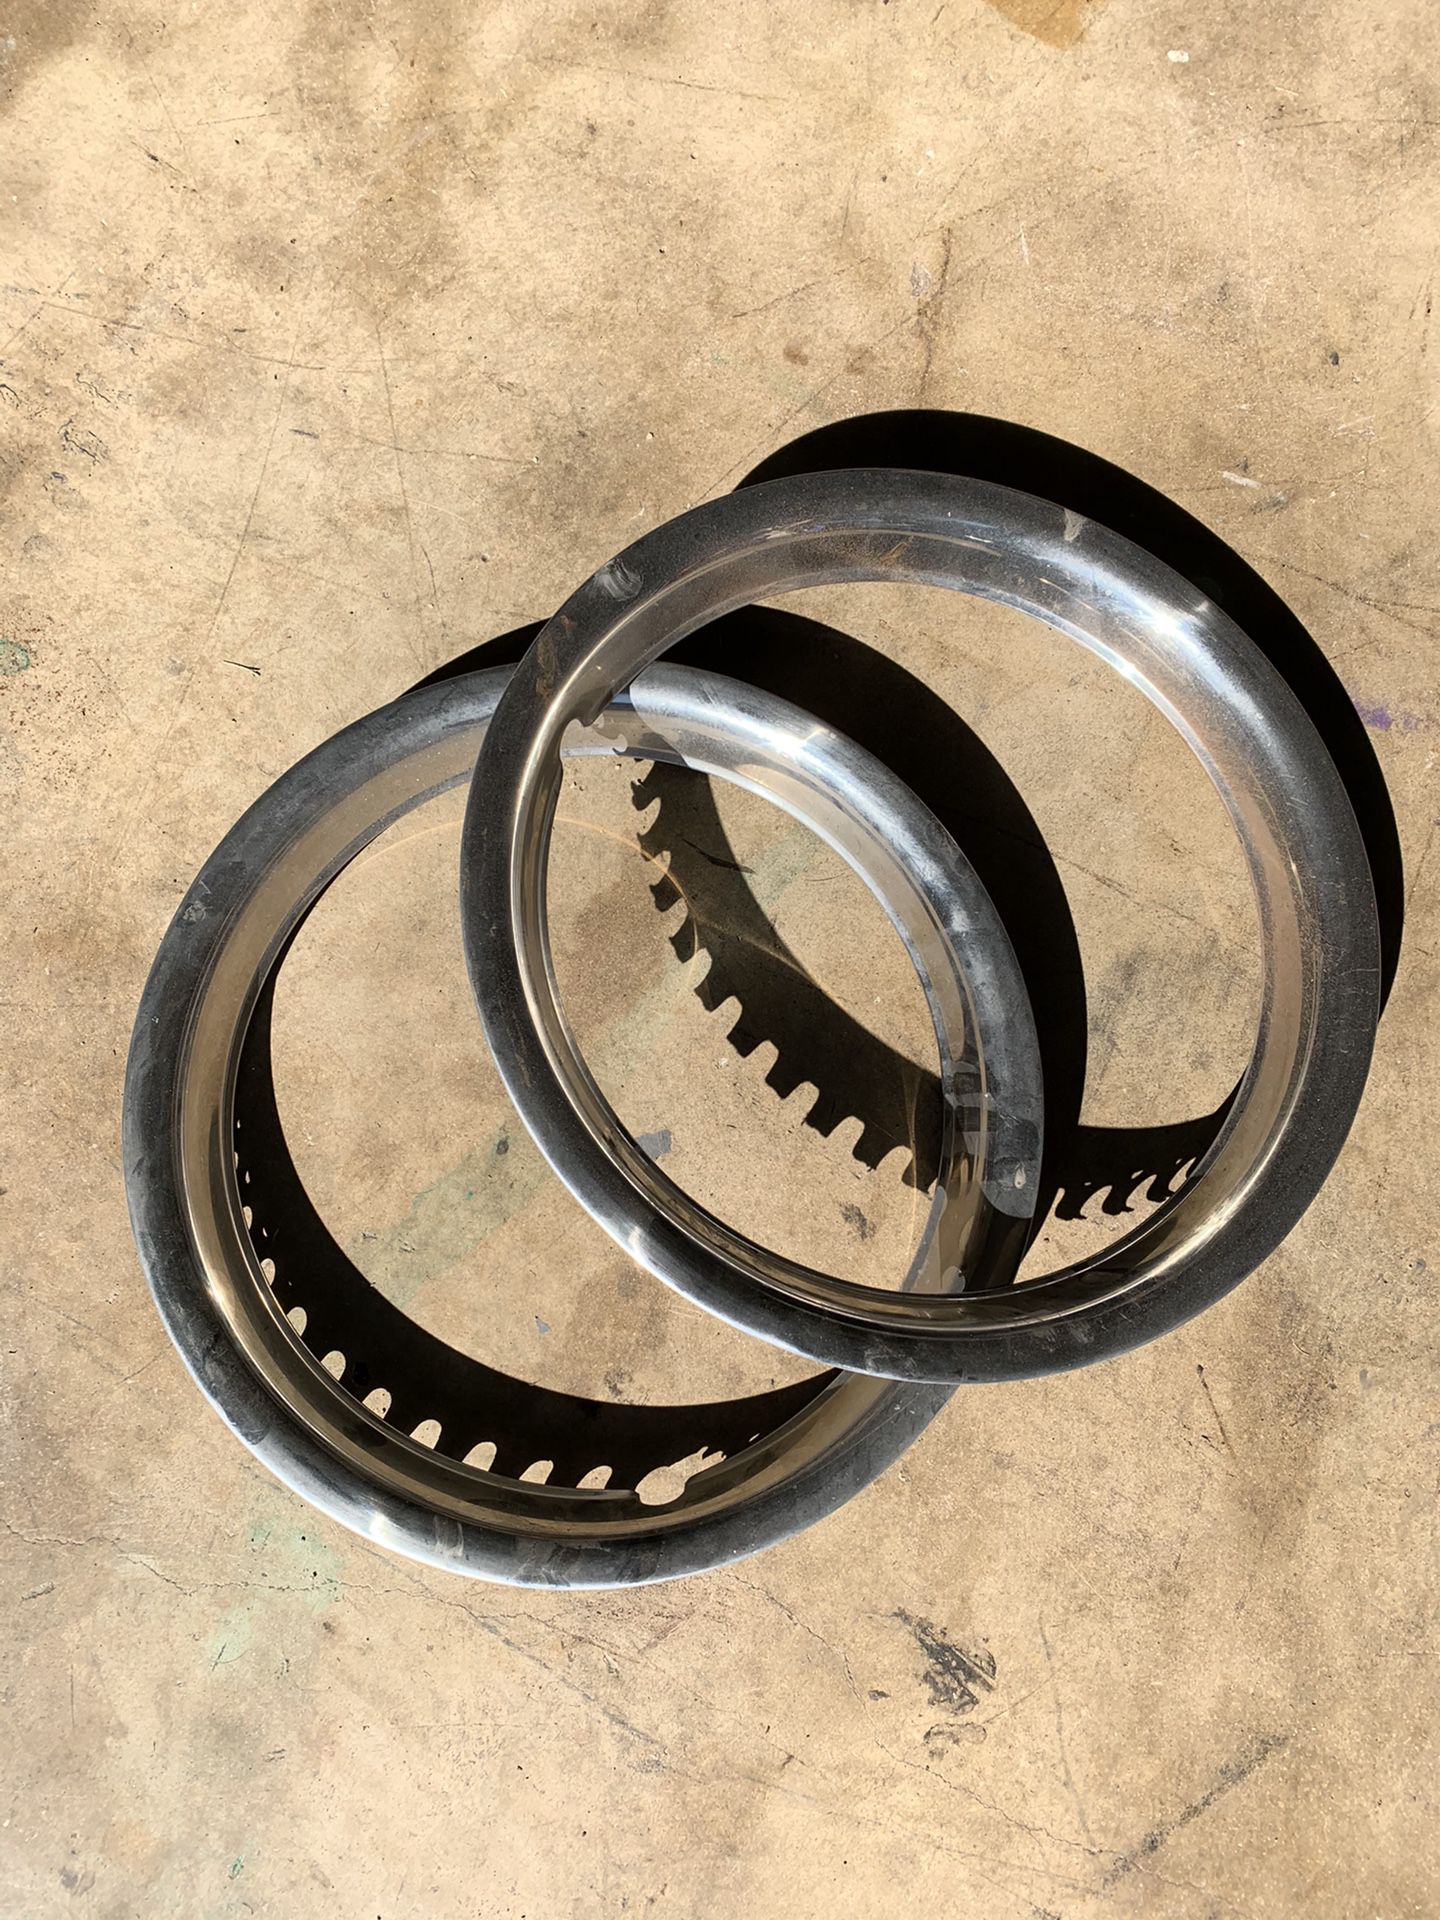 Two 15” Trim rings for rims in good shape